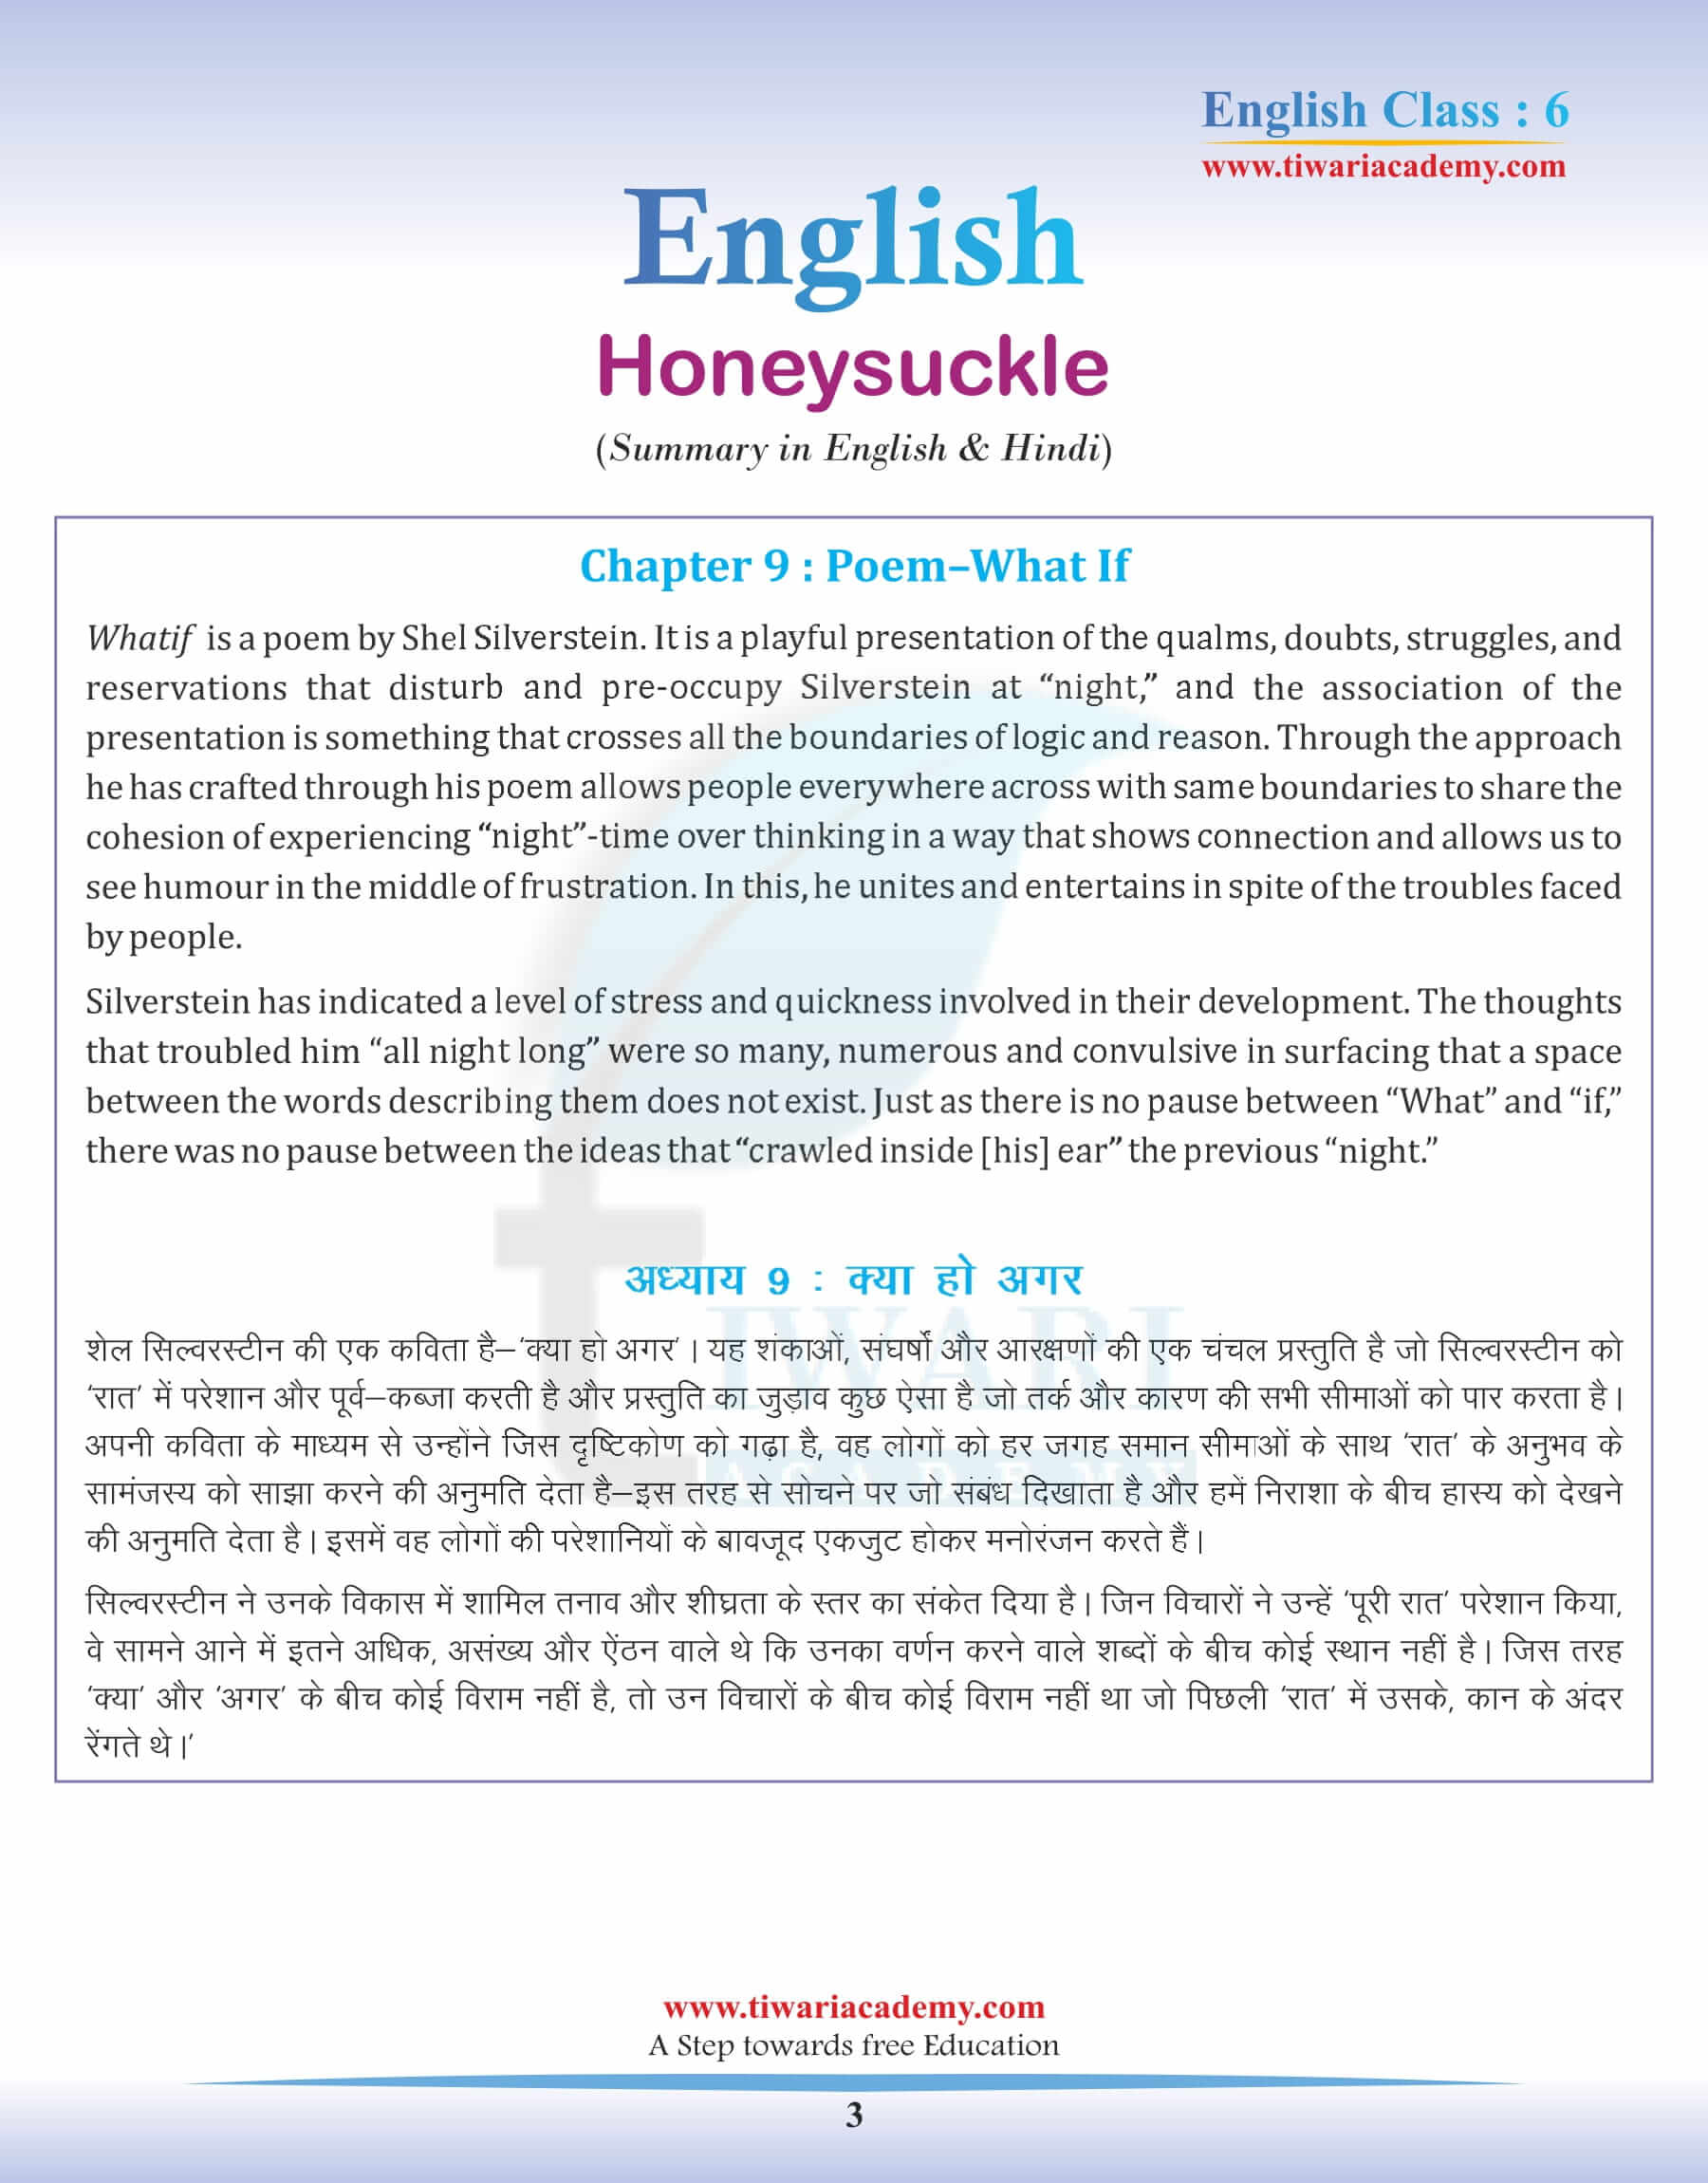 Class 6 English Chapter 9 Summary in Hindi and English